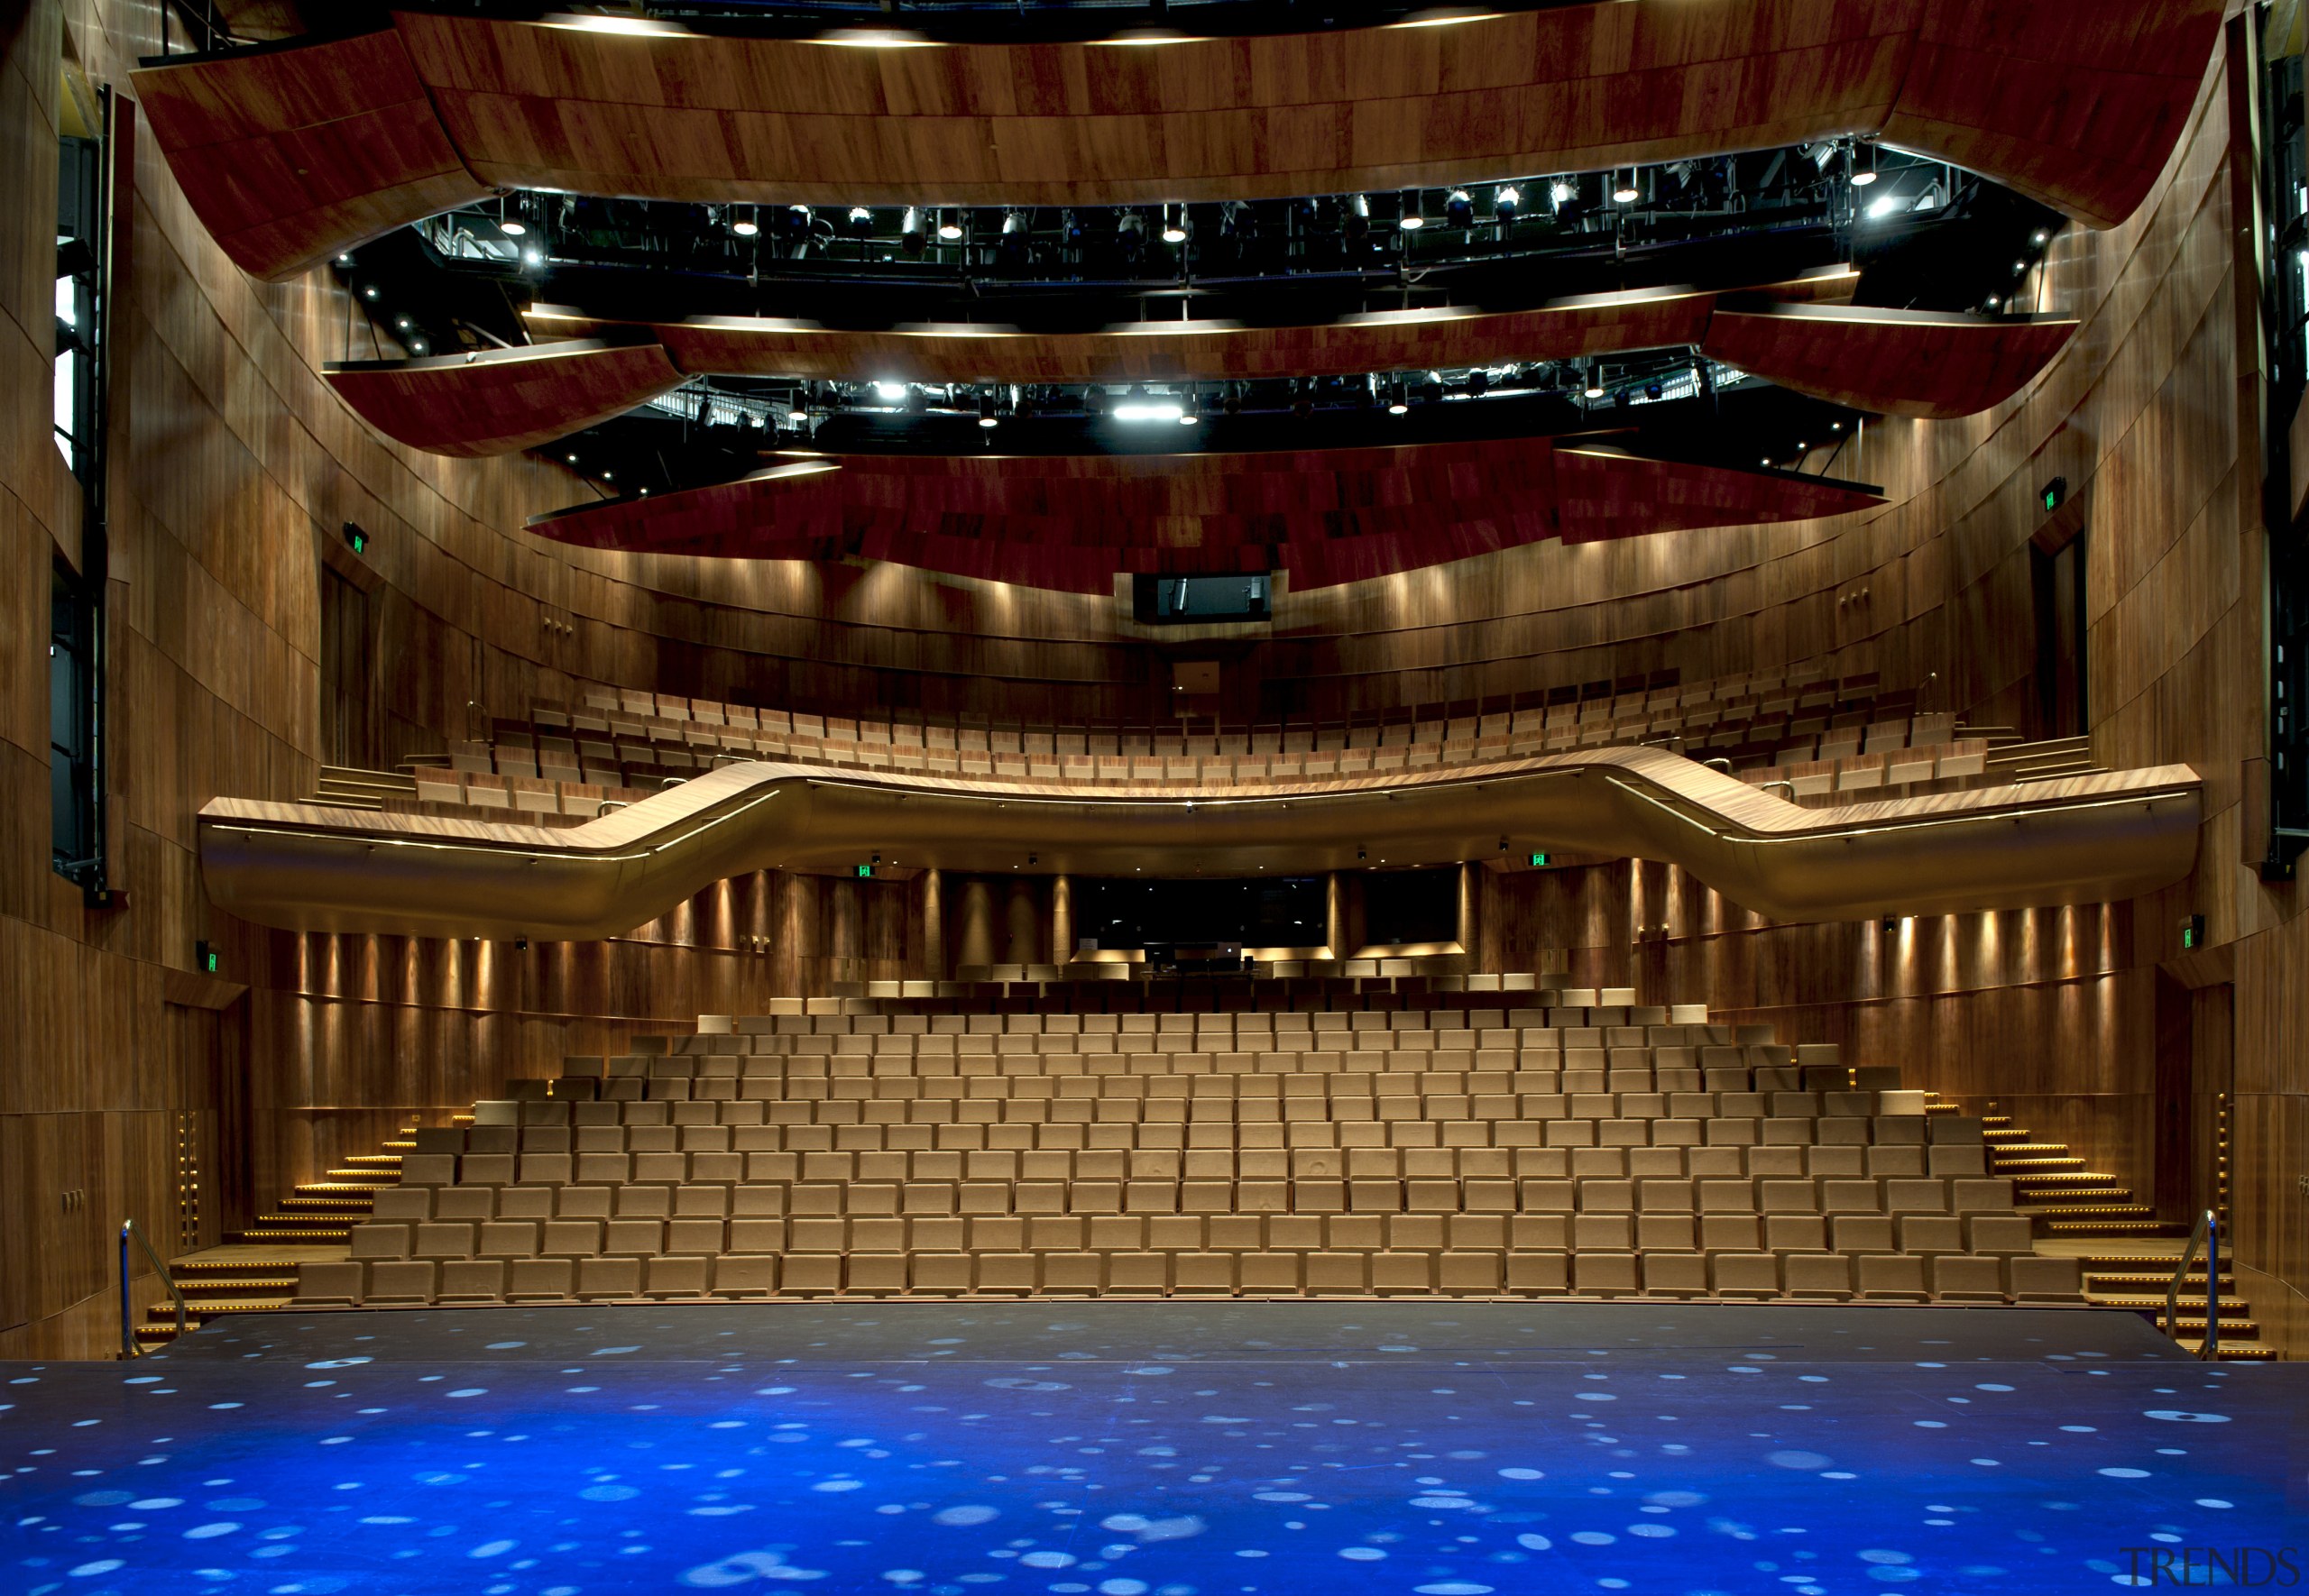 This is the Perth State Theatre, designed by auditorium, concert hall, musical instrument accessory, opera house, performing arts center, stage, theatre, brown, red